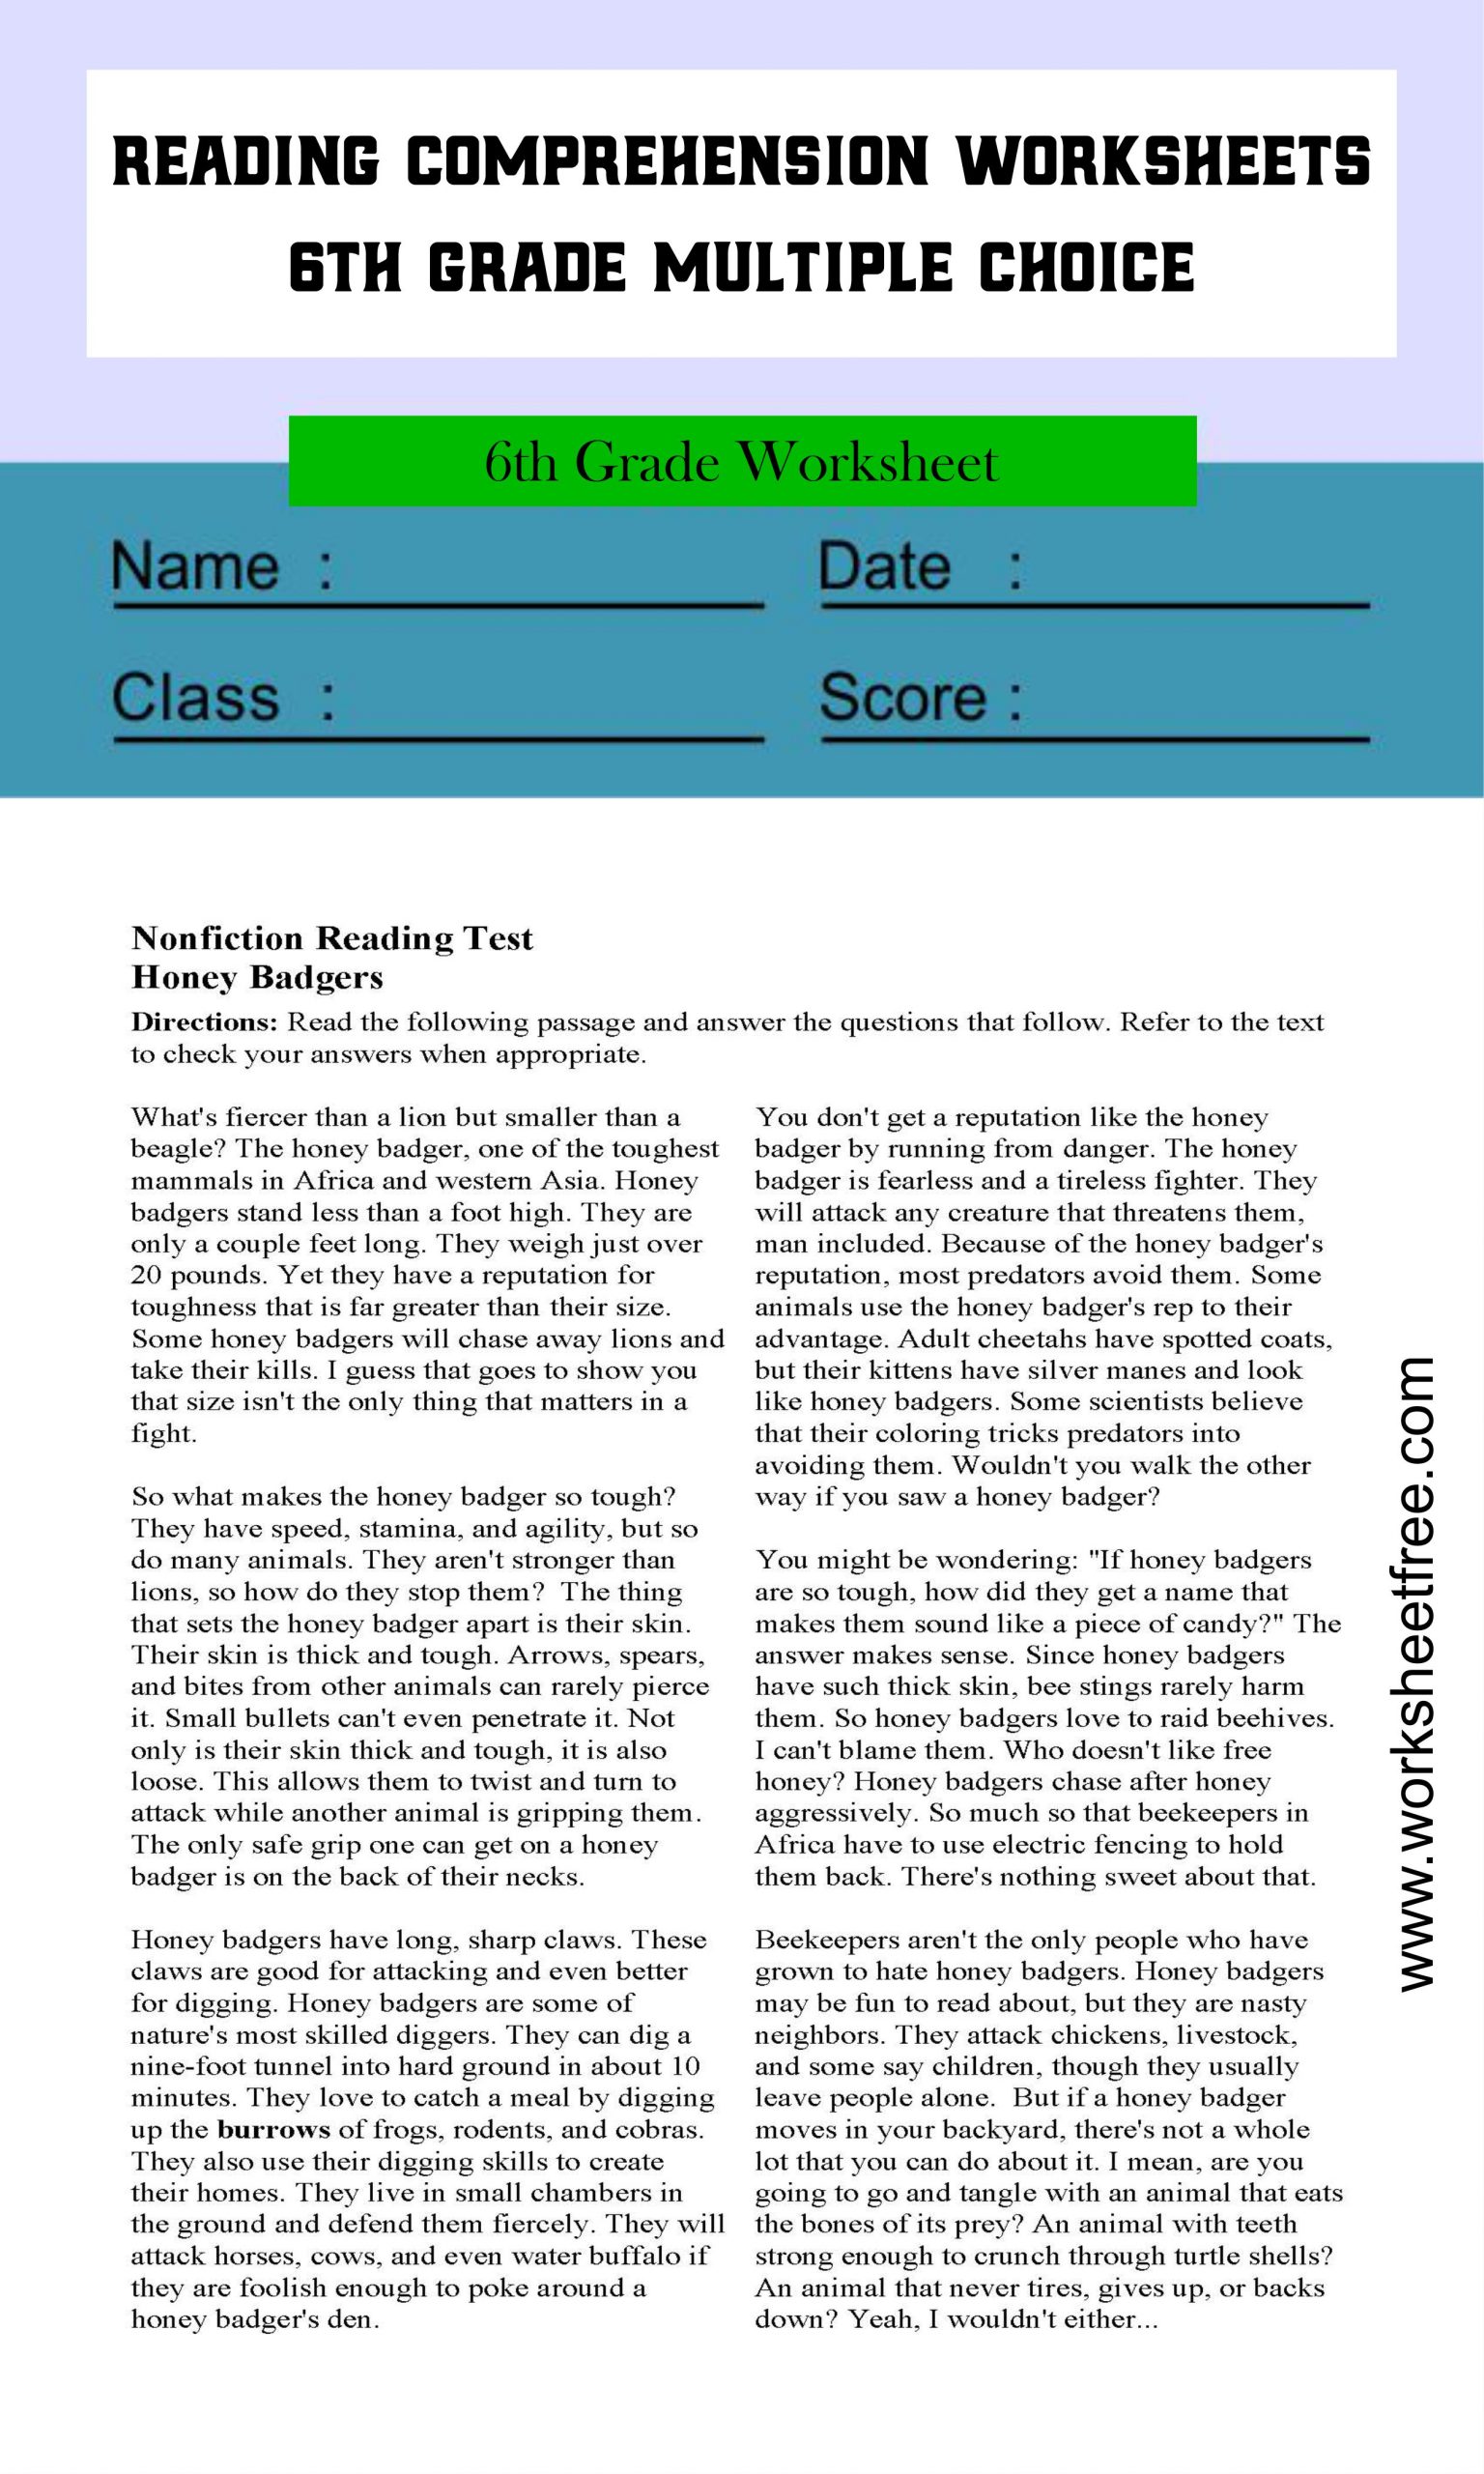 Reading Comprehension Worksheets 6th Grade Multiple Choice 1 